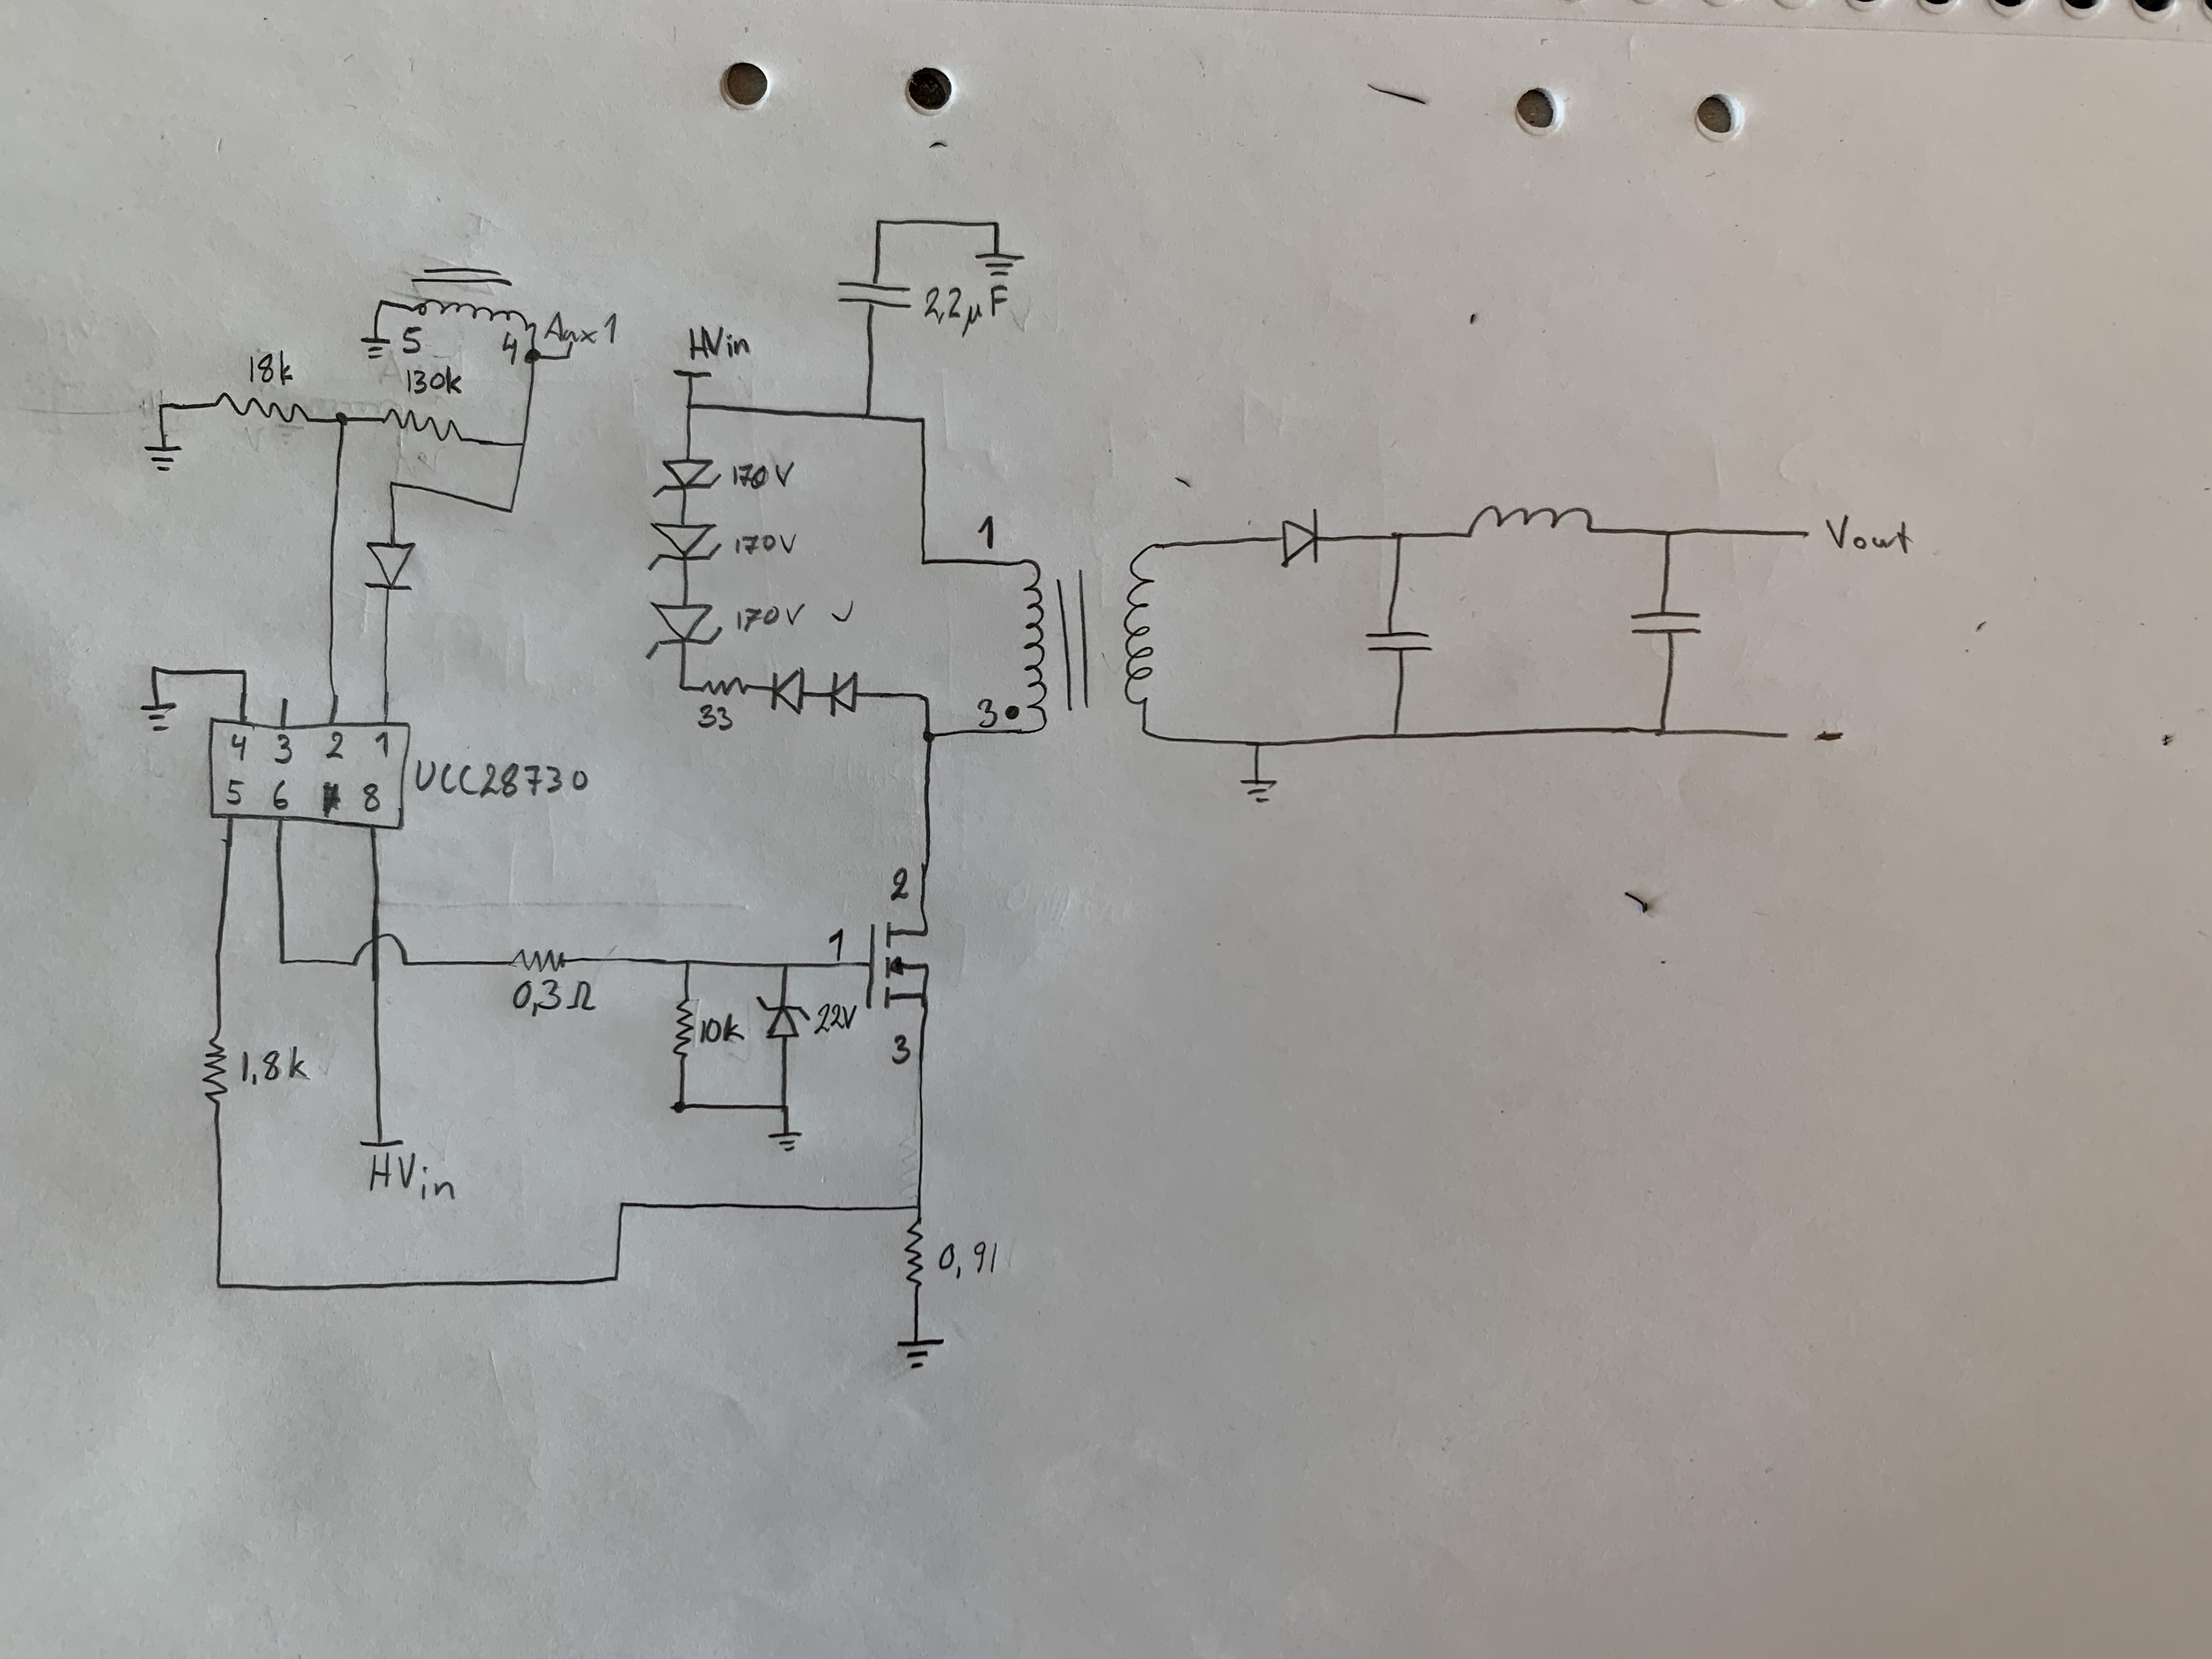 UCC28730: Does not switch as expected, too low output voltage 